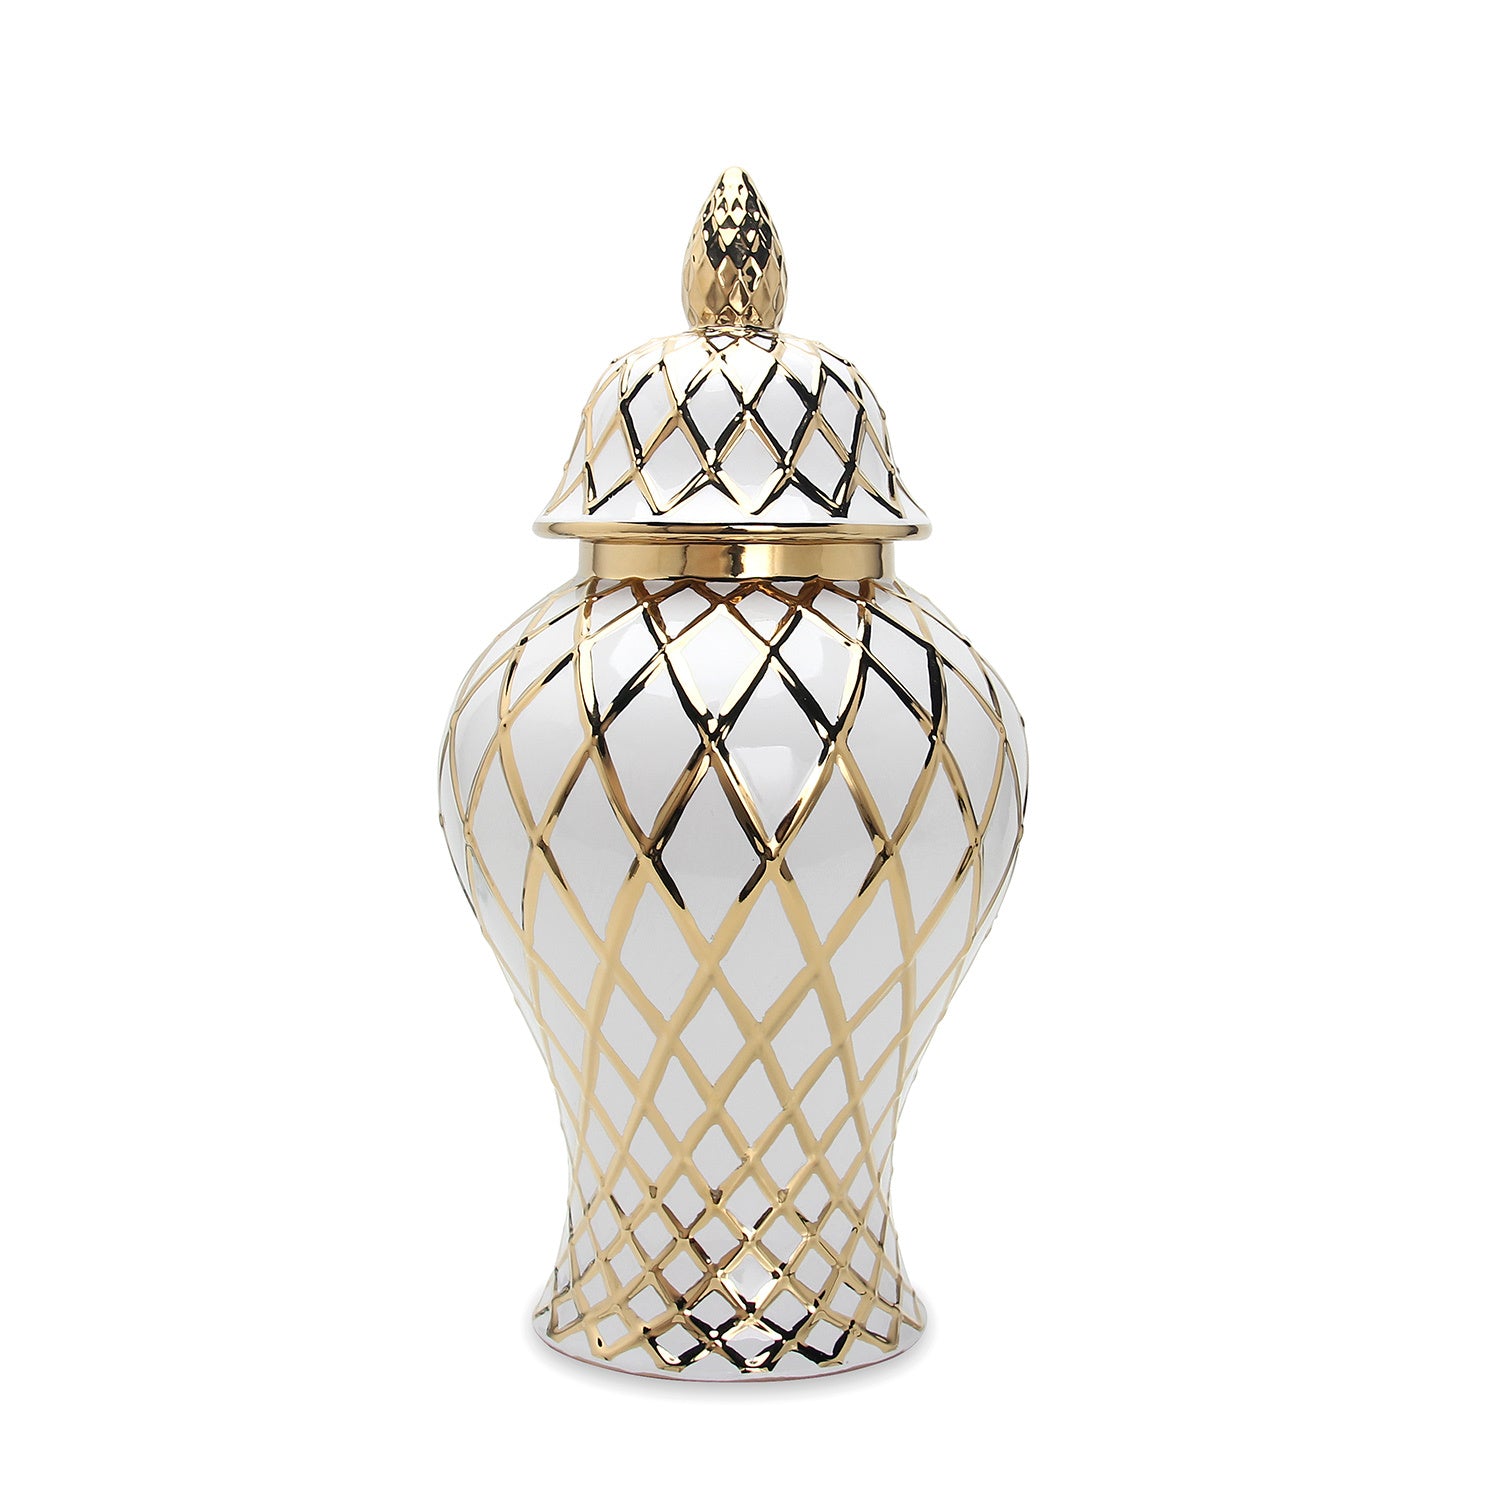 A White and Gold Ceramic Decorative Ginger Jar Vase with gold embellishments, displayed on a white background.